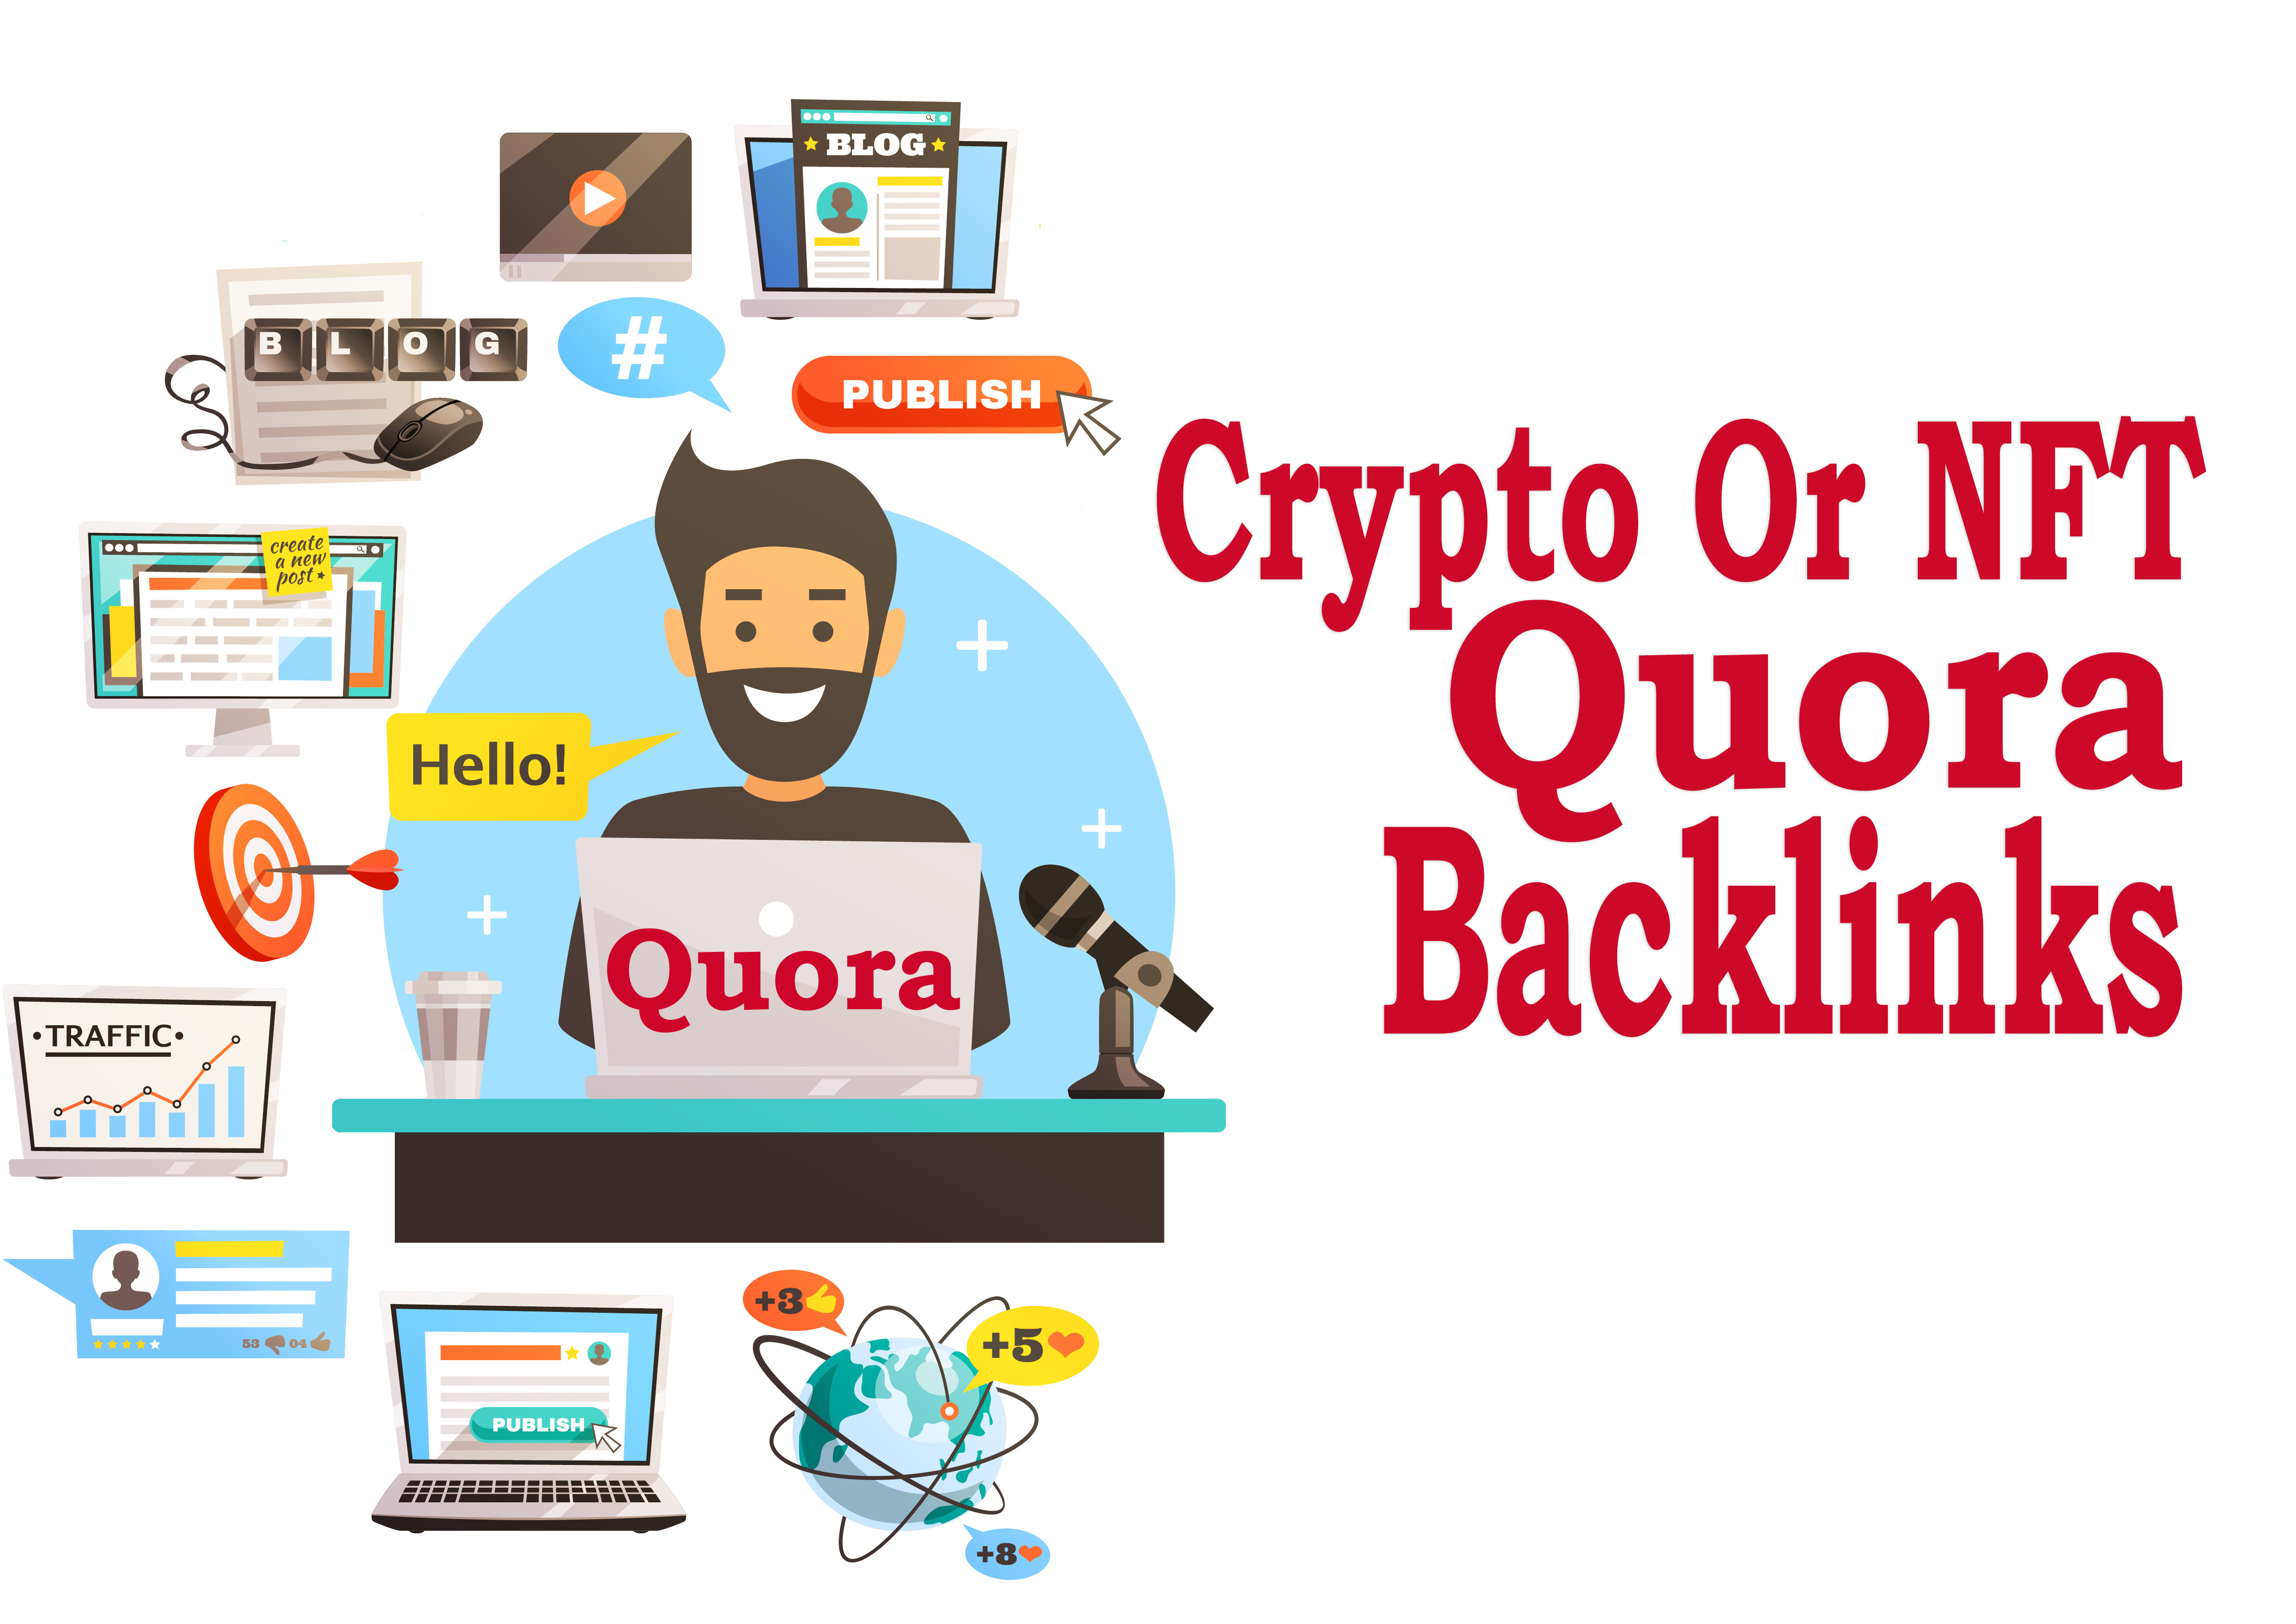 Promote Your Crypto Or NFT Website With 100 Quora Backlinks